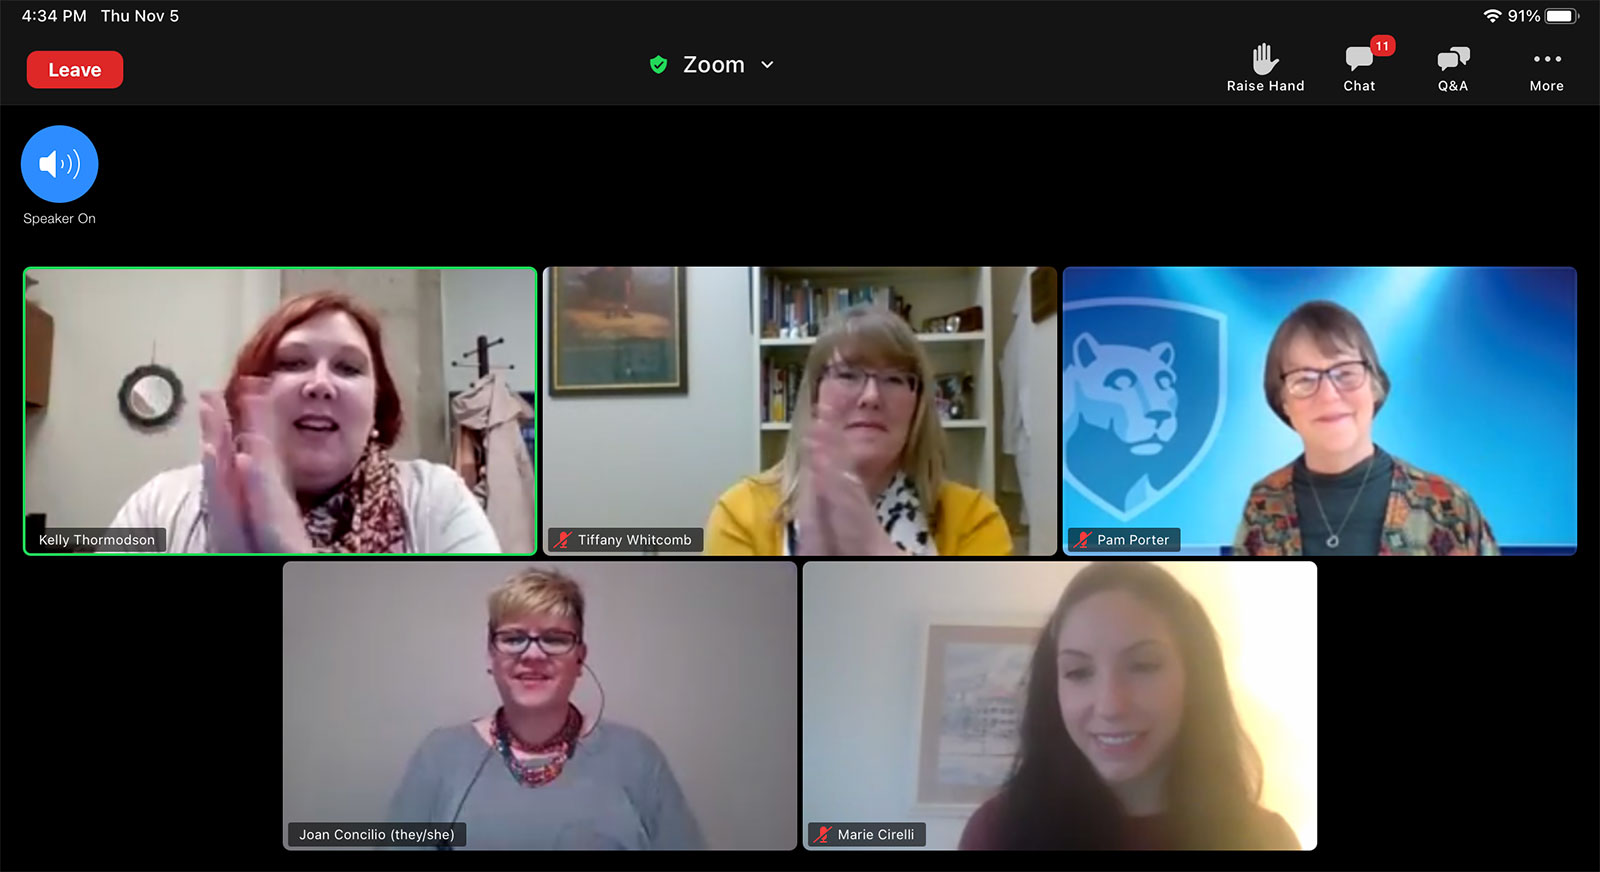 A screenshot from a Zoom webinar shows the faces of five people - four women and one nonbinary person - from their video.